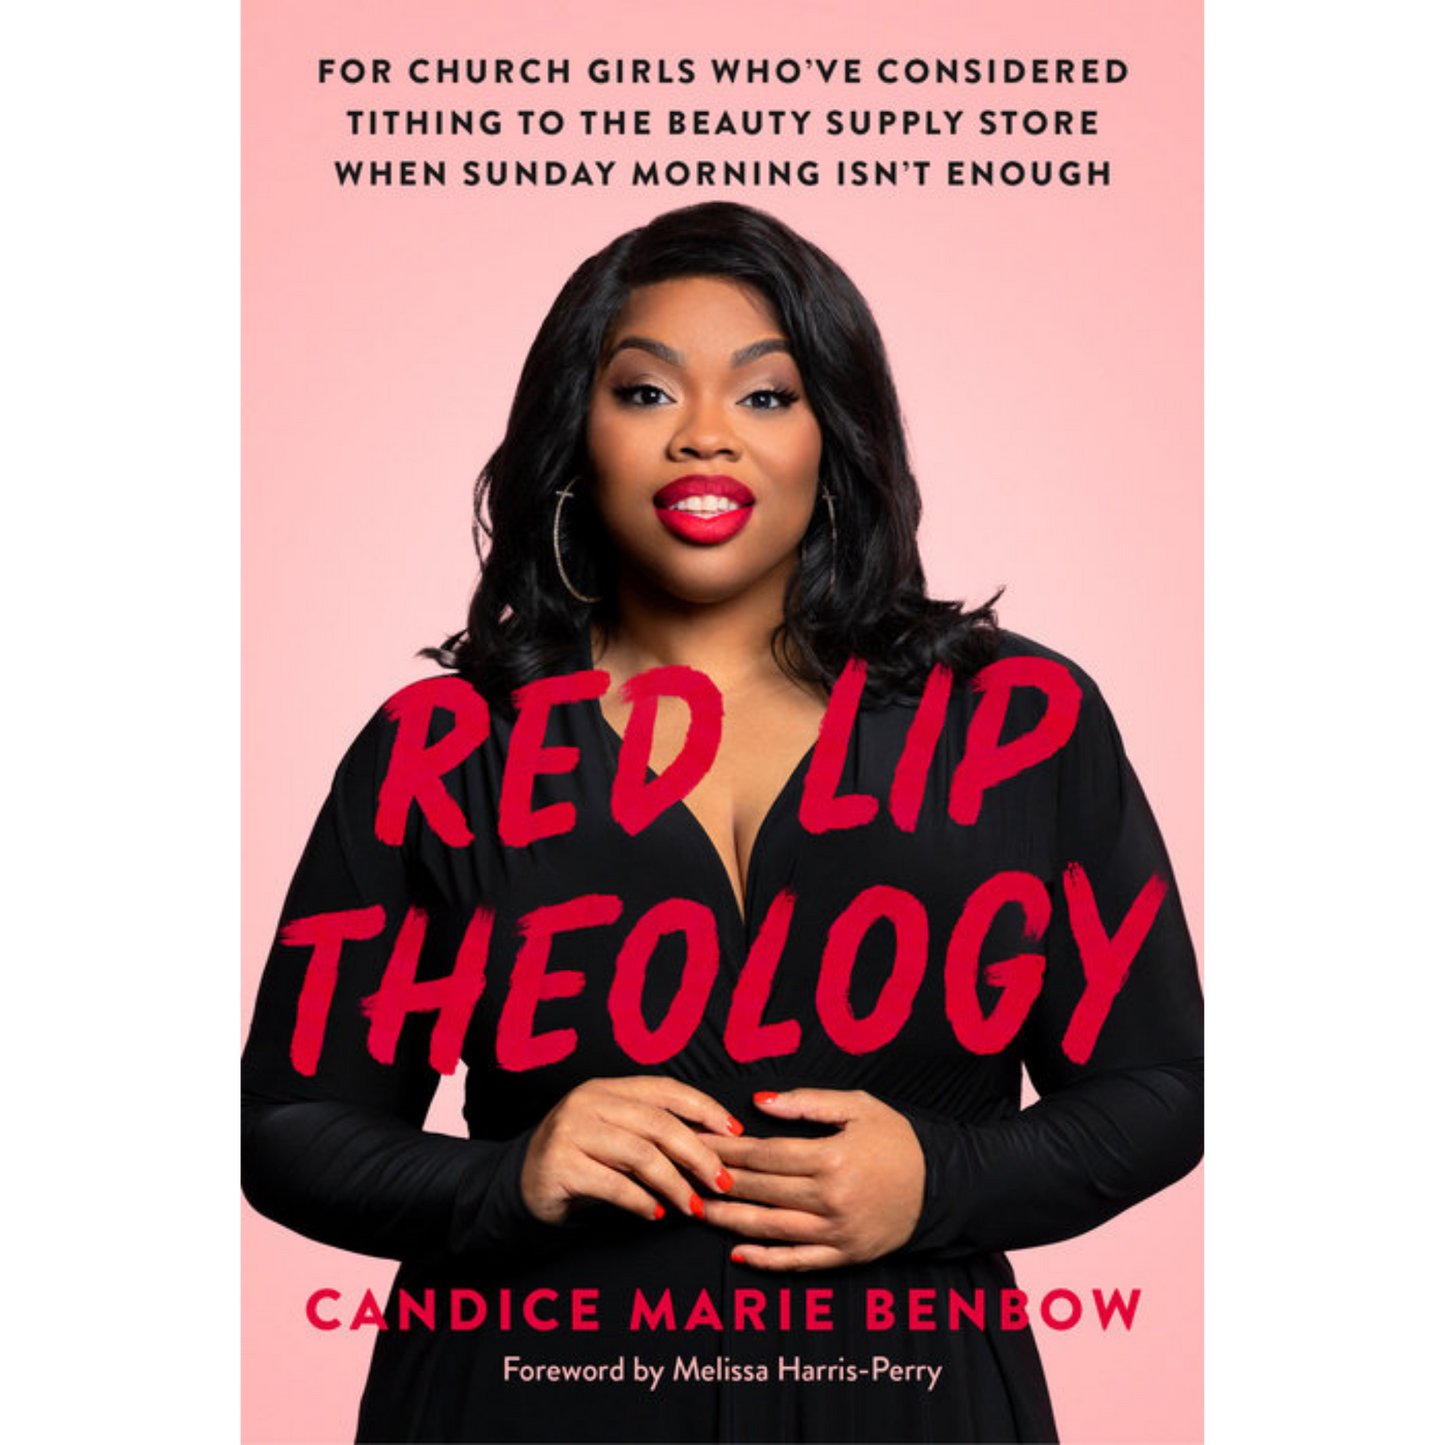 red lip theology candice marie benbow